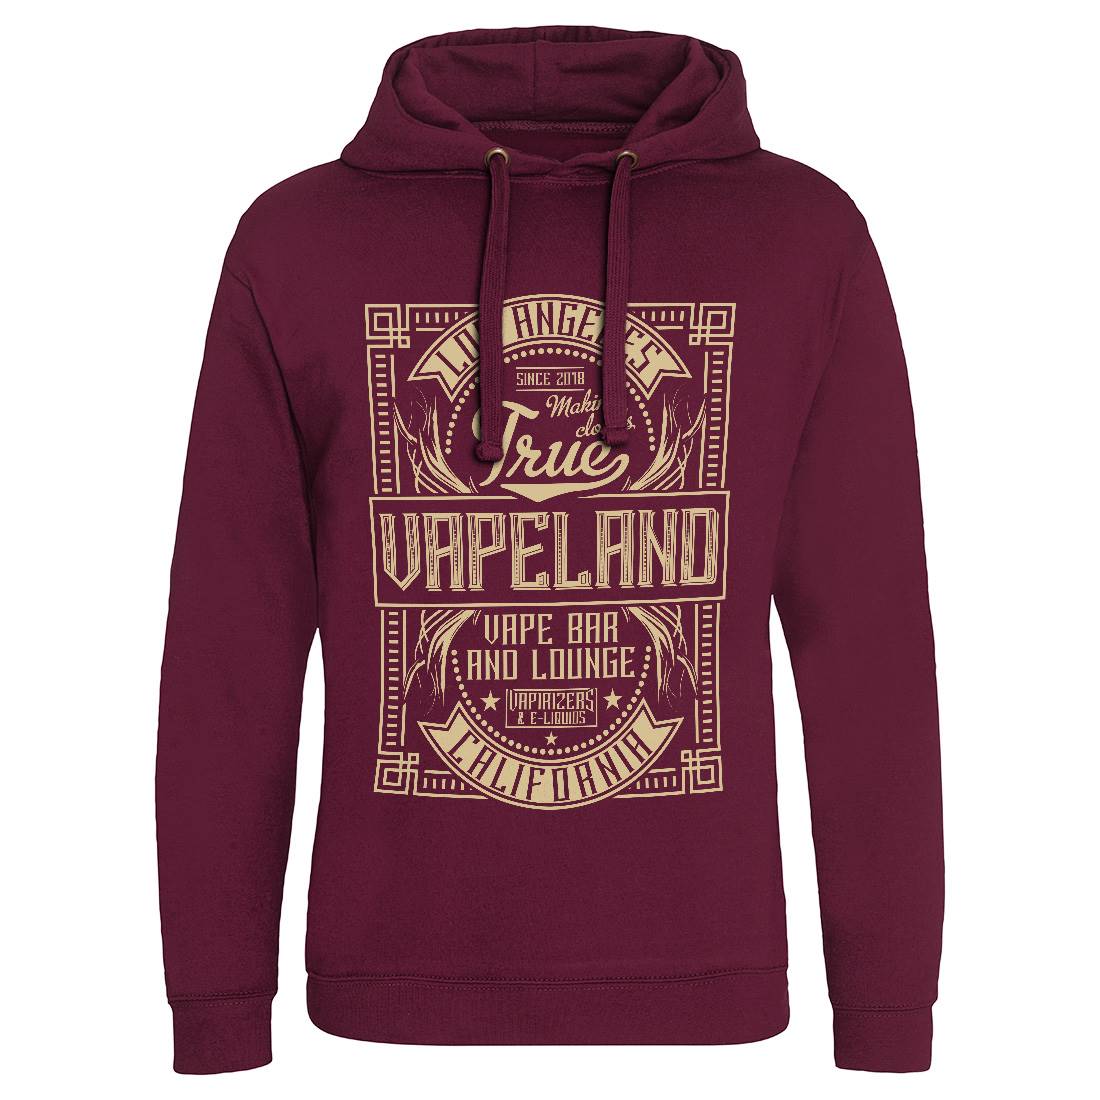 Vapeland Mens Hoodie Without Pocket Drugs A396